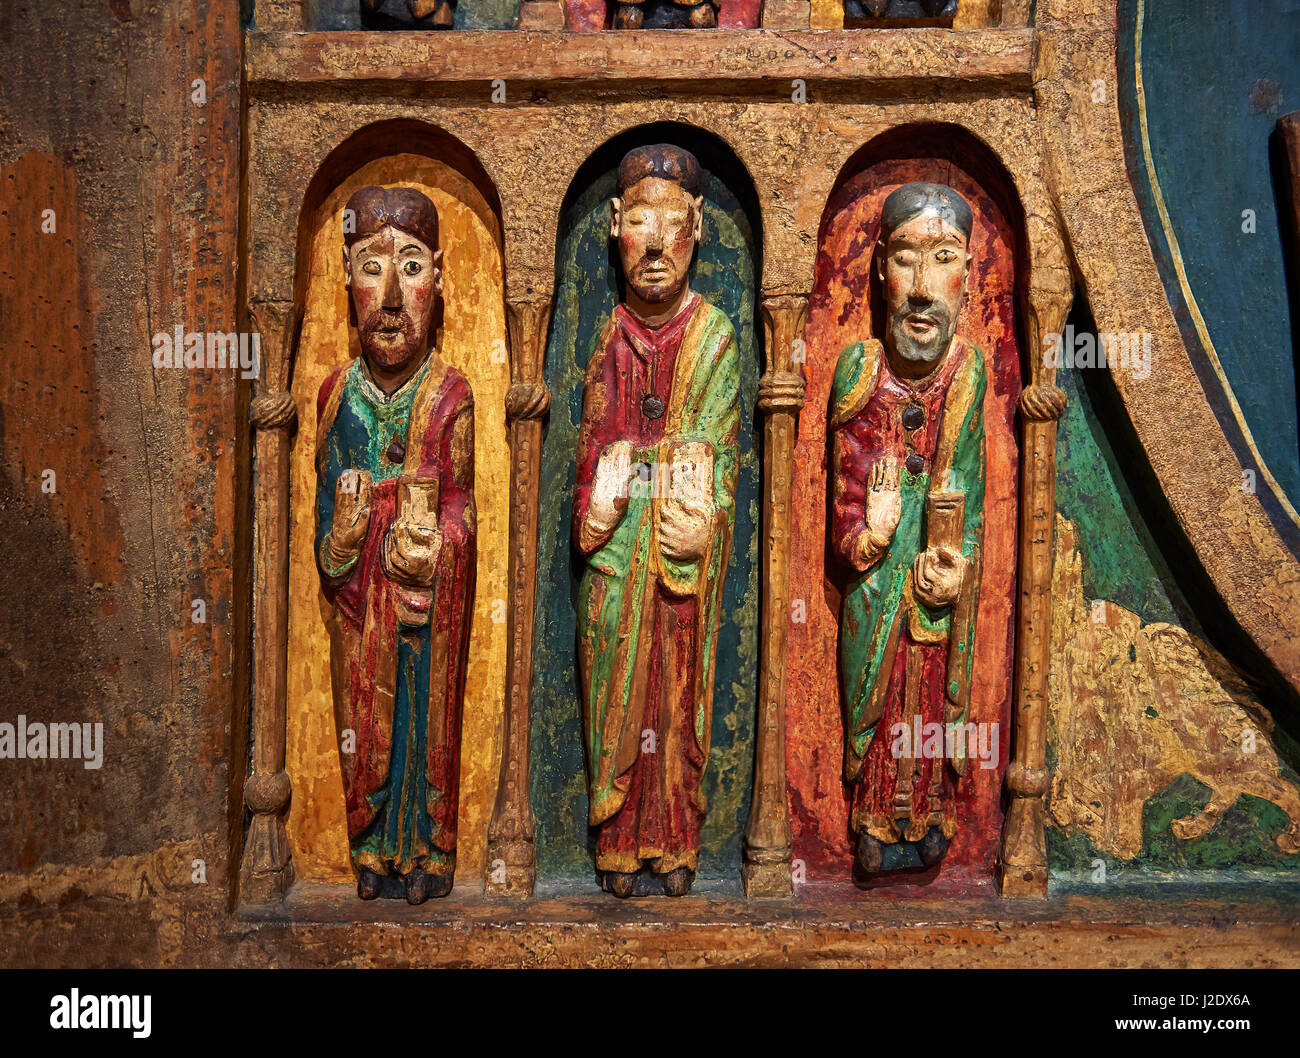 Thirteenth century Romanesque carved and painted altar depicting the Apostles from St. Maria de Taull, Vall de Boi, High Ribagorca, Spain.  National A Stock Photo